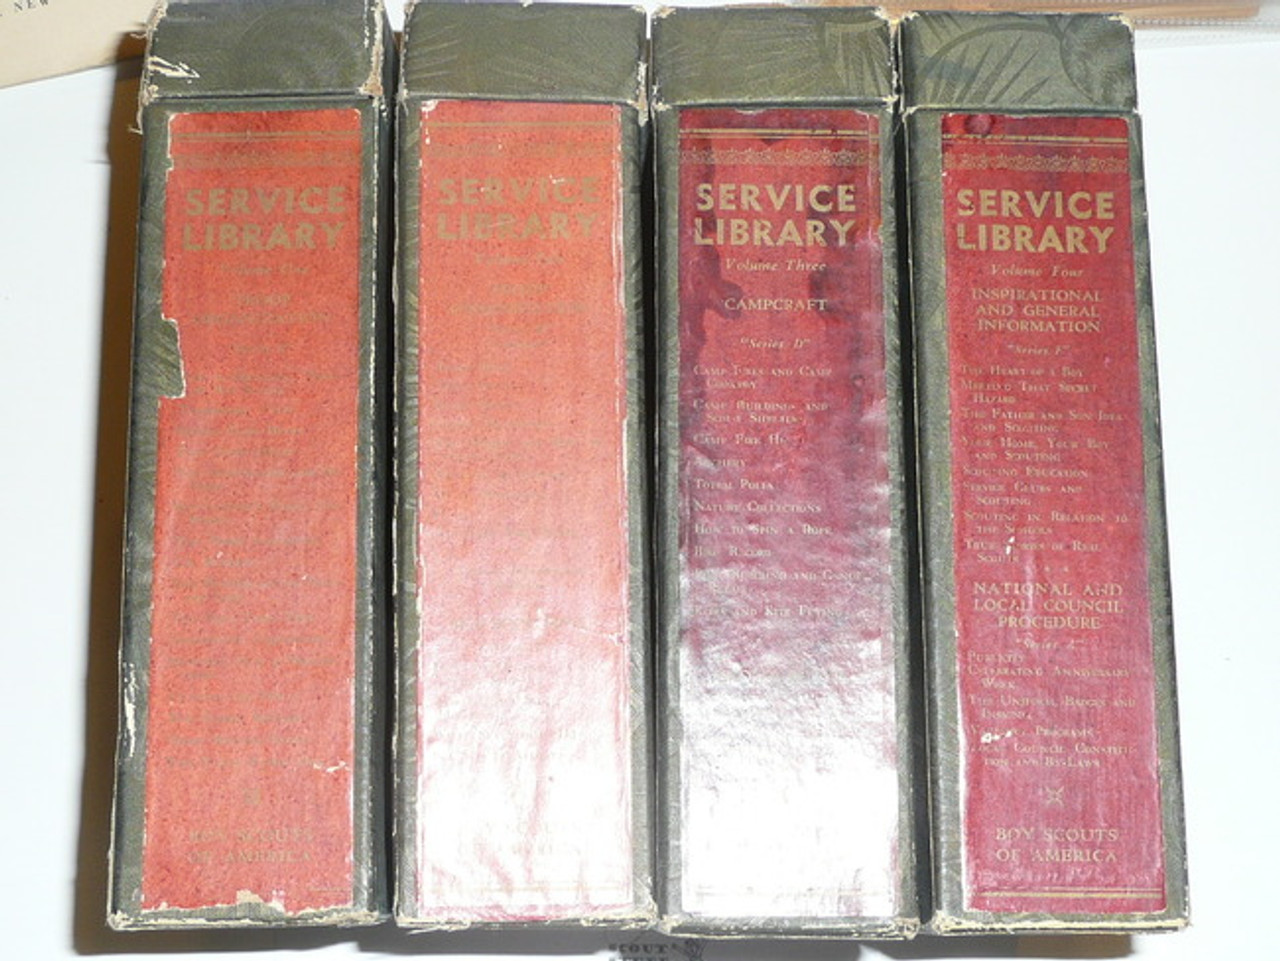 Boy Scout Service Library Storage Boxes, From the Twenties, Official BSA Issue, VERY RARE, Some Wear But Truly a Scarcity